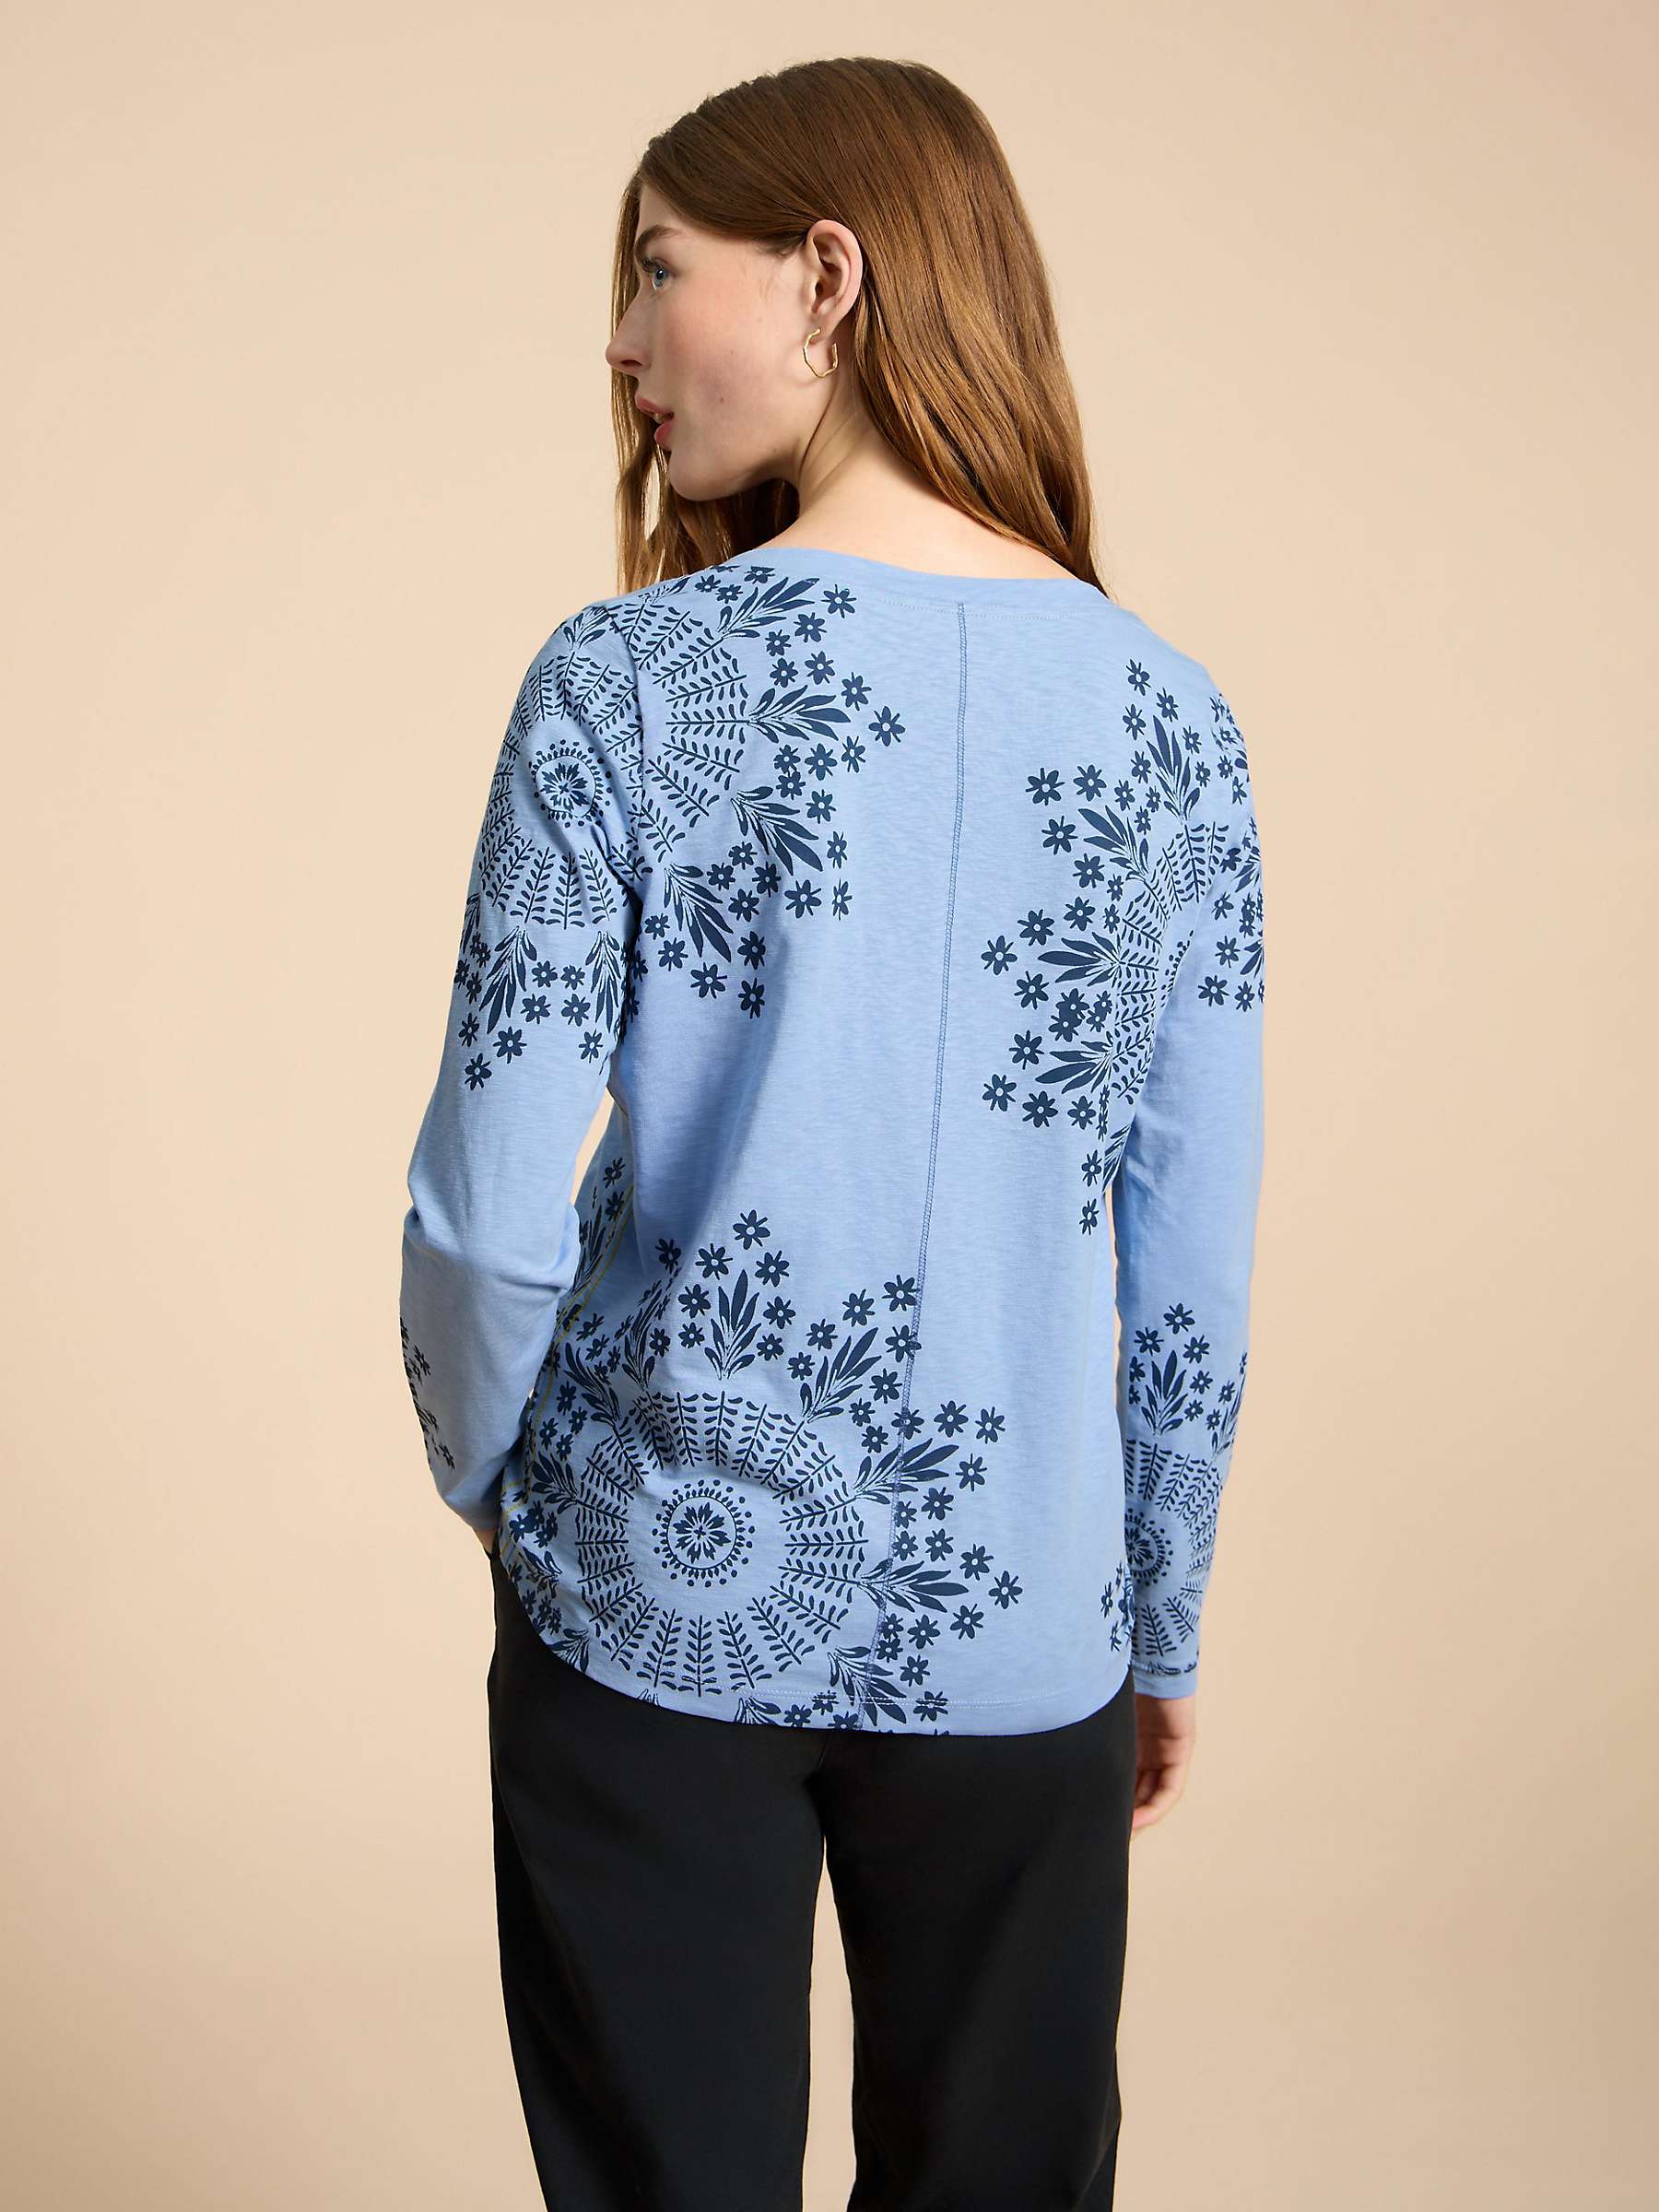 Buy White Stuff Nelly Long Sleeve Floral Print T-Shirt, Blue/Multi Online at johnlewis.com